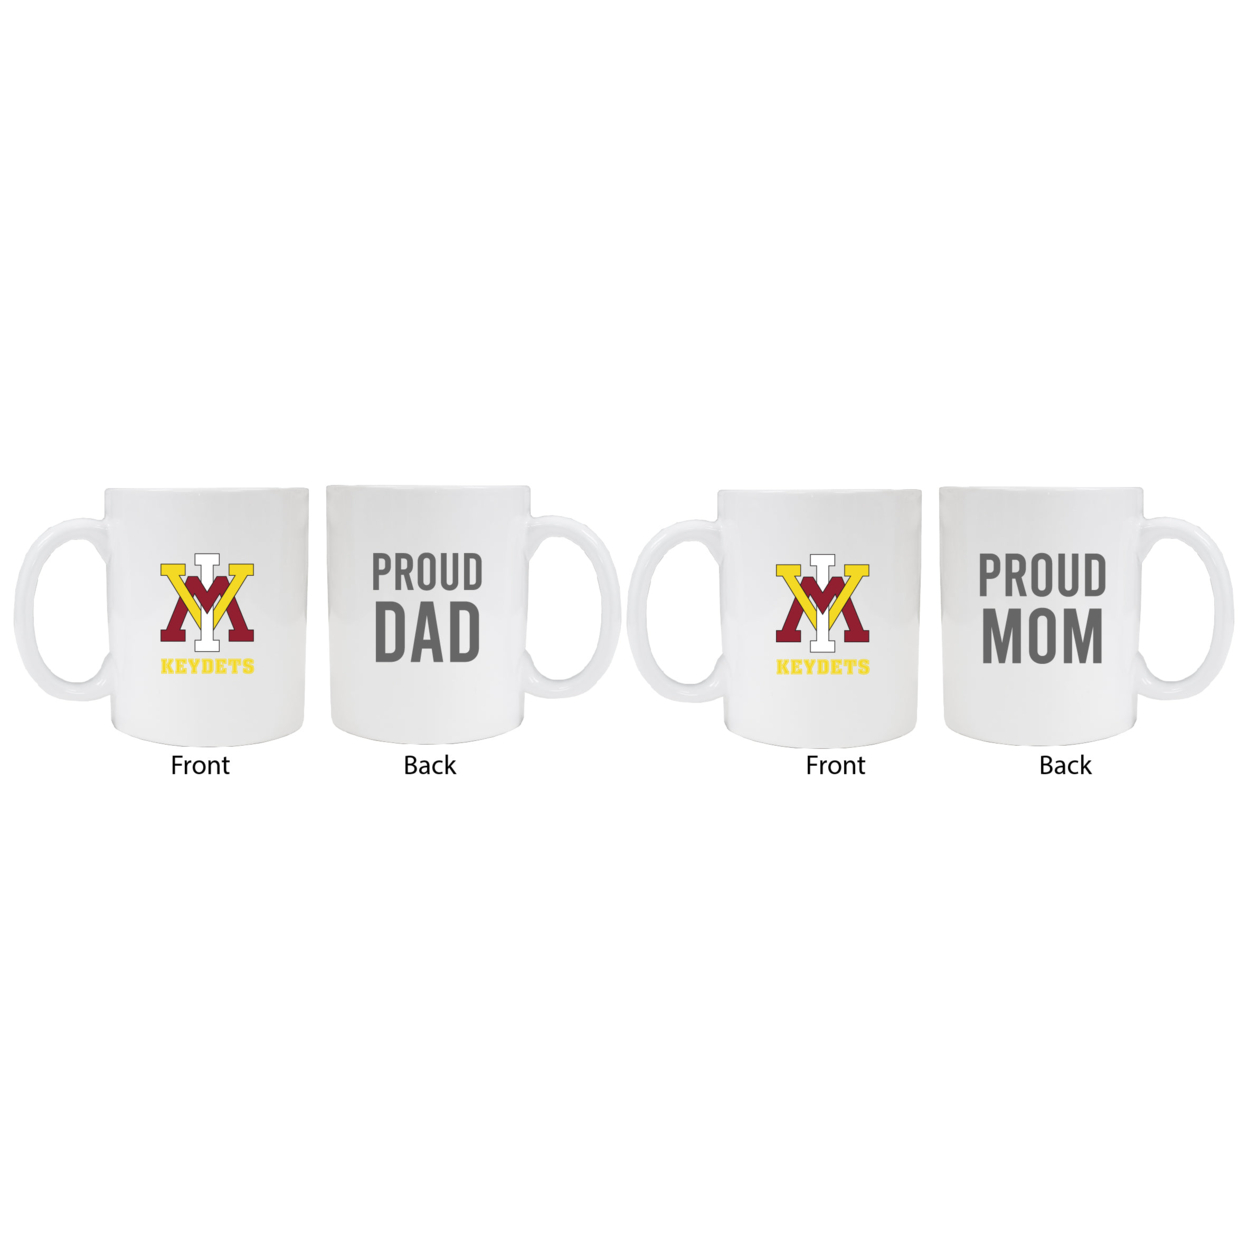 VMI Keydets Proud Mom And Dad White Ceramic Coffee Mug 2 Pack (White).